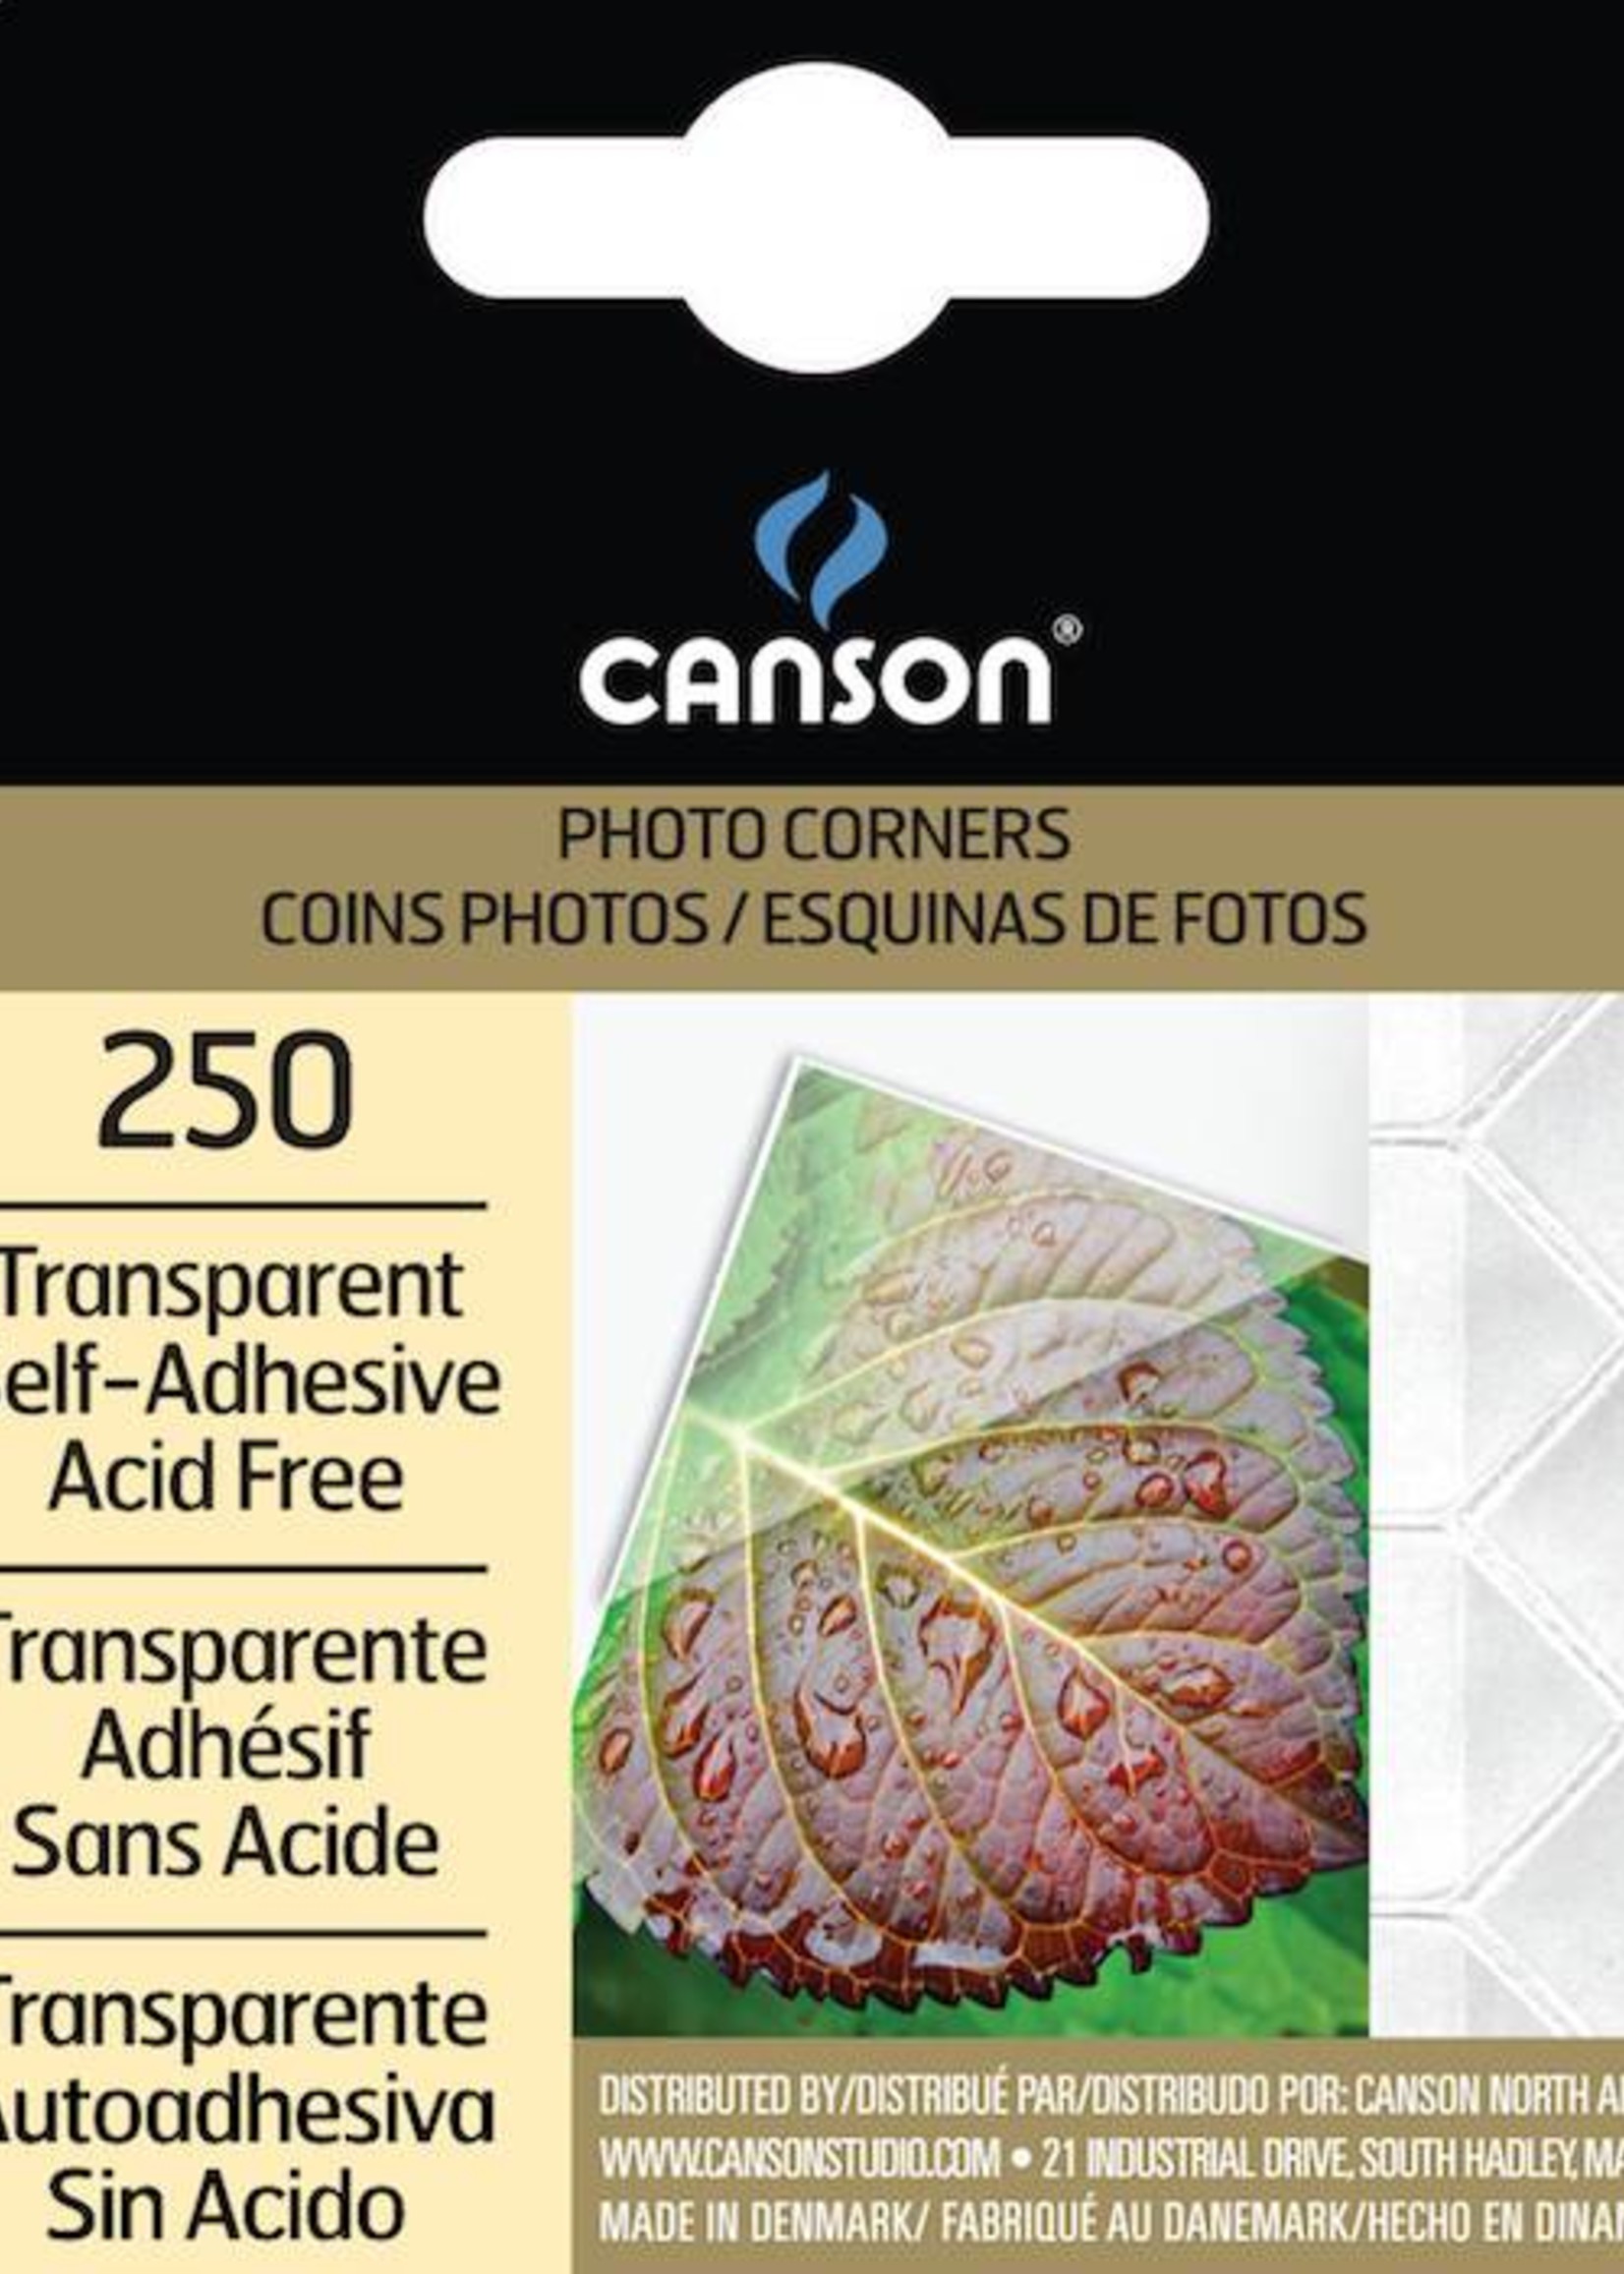 CANSON CANSON PHOTO CORNERS SELF-ADHESIVE TRANSPARENT 250/PK    CAN-100510368